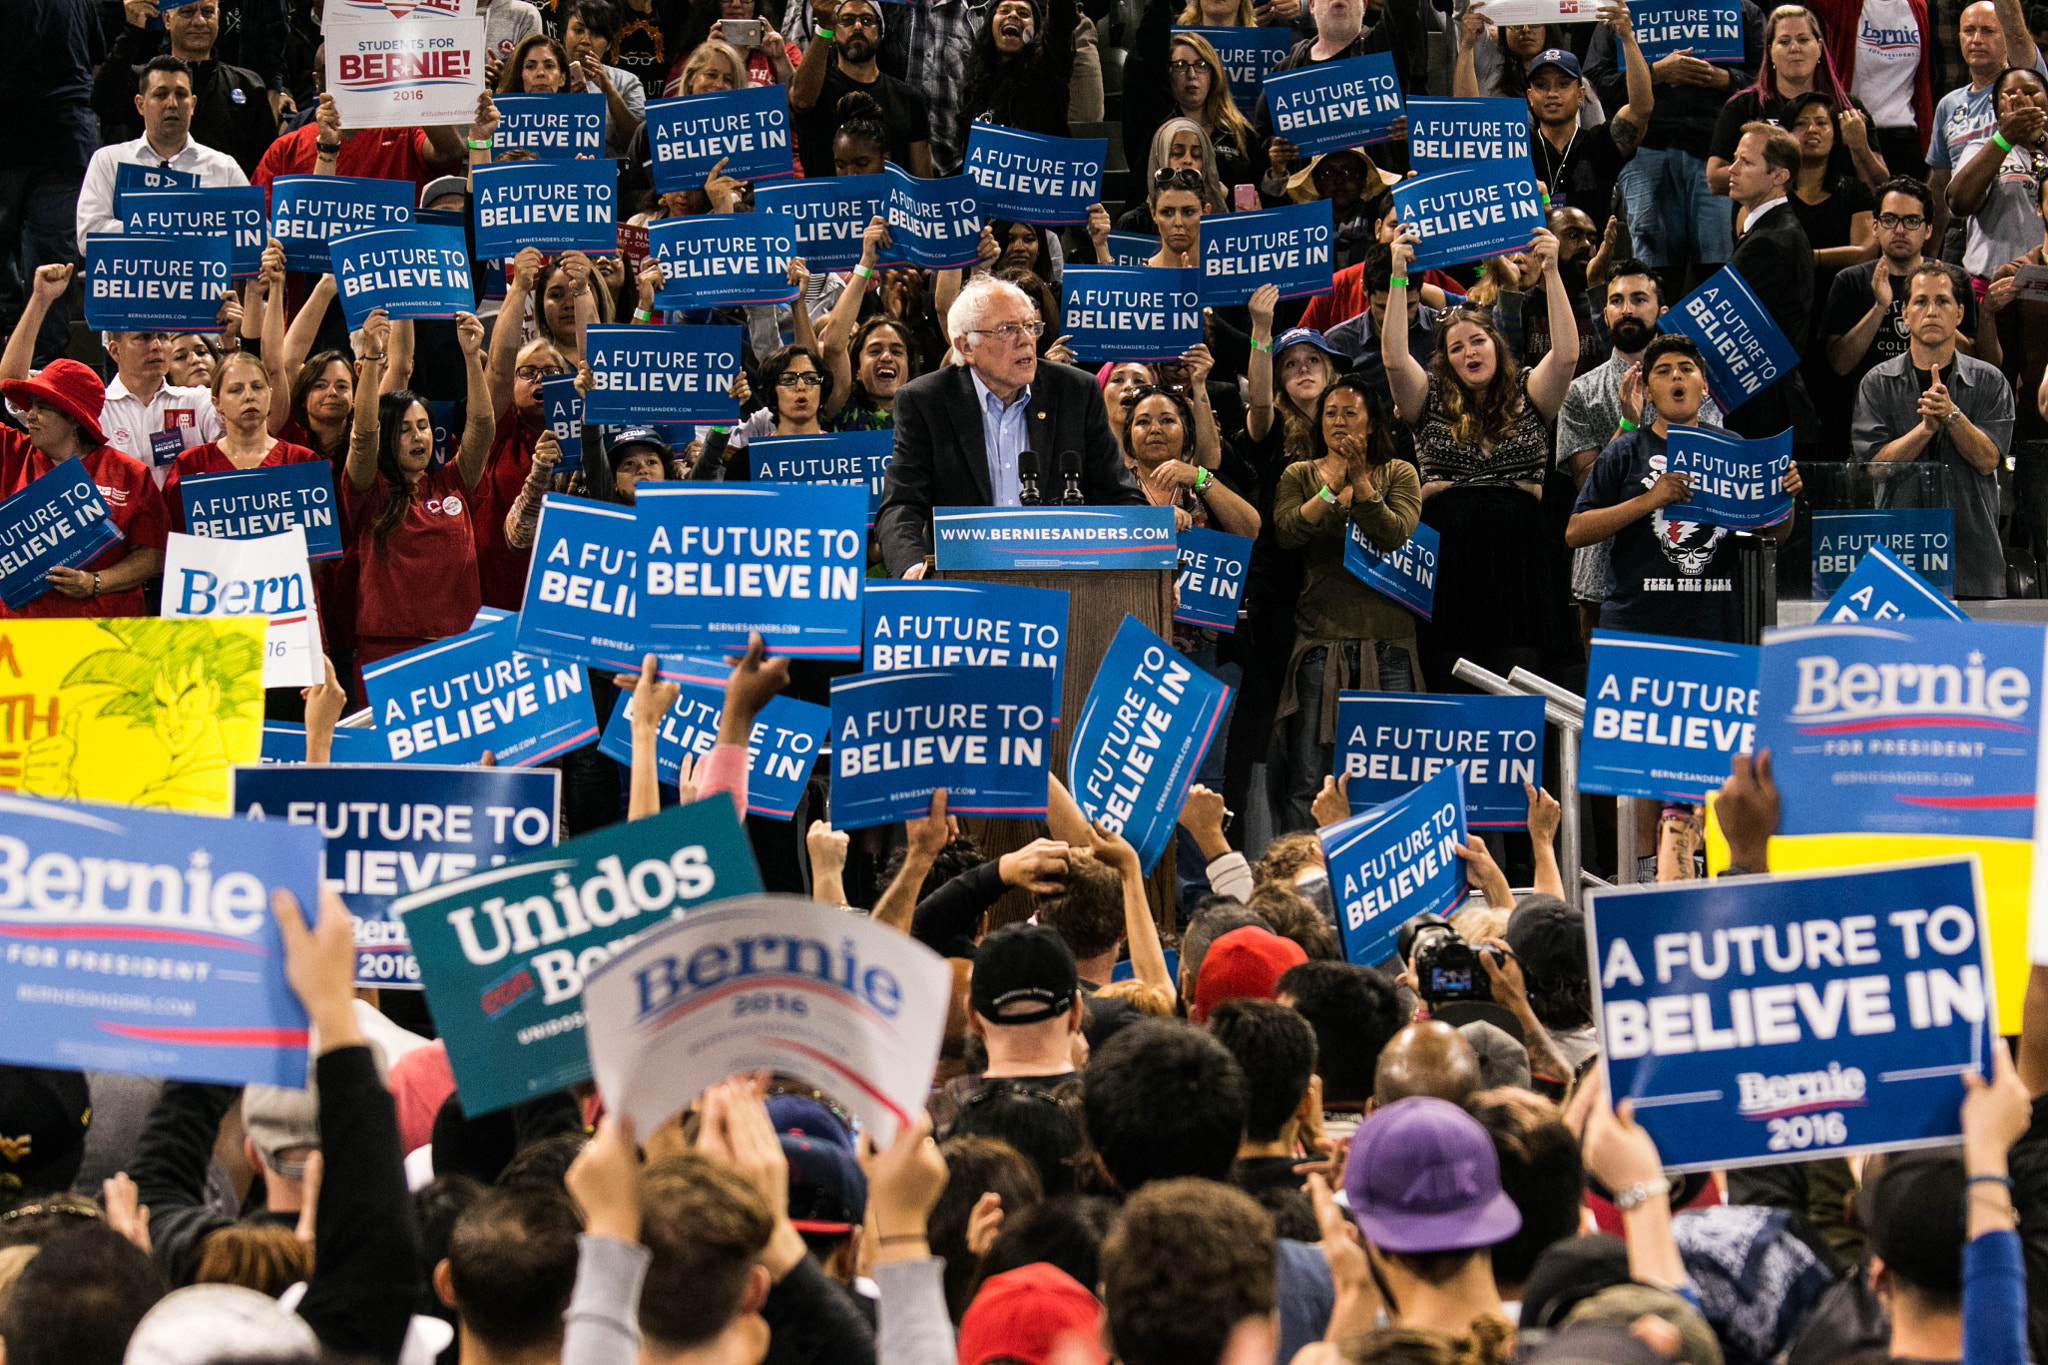 Canon EOS 70D sample photo. Berni sanders during the rally he held on may 17, 2016 in carson, calif. as a last attempt to win... photography